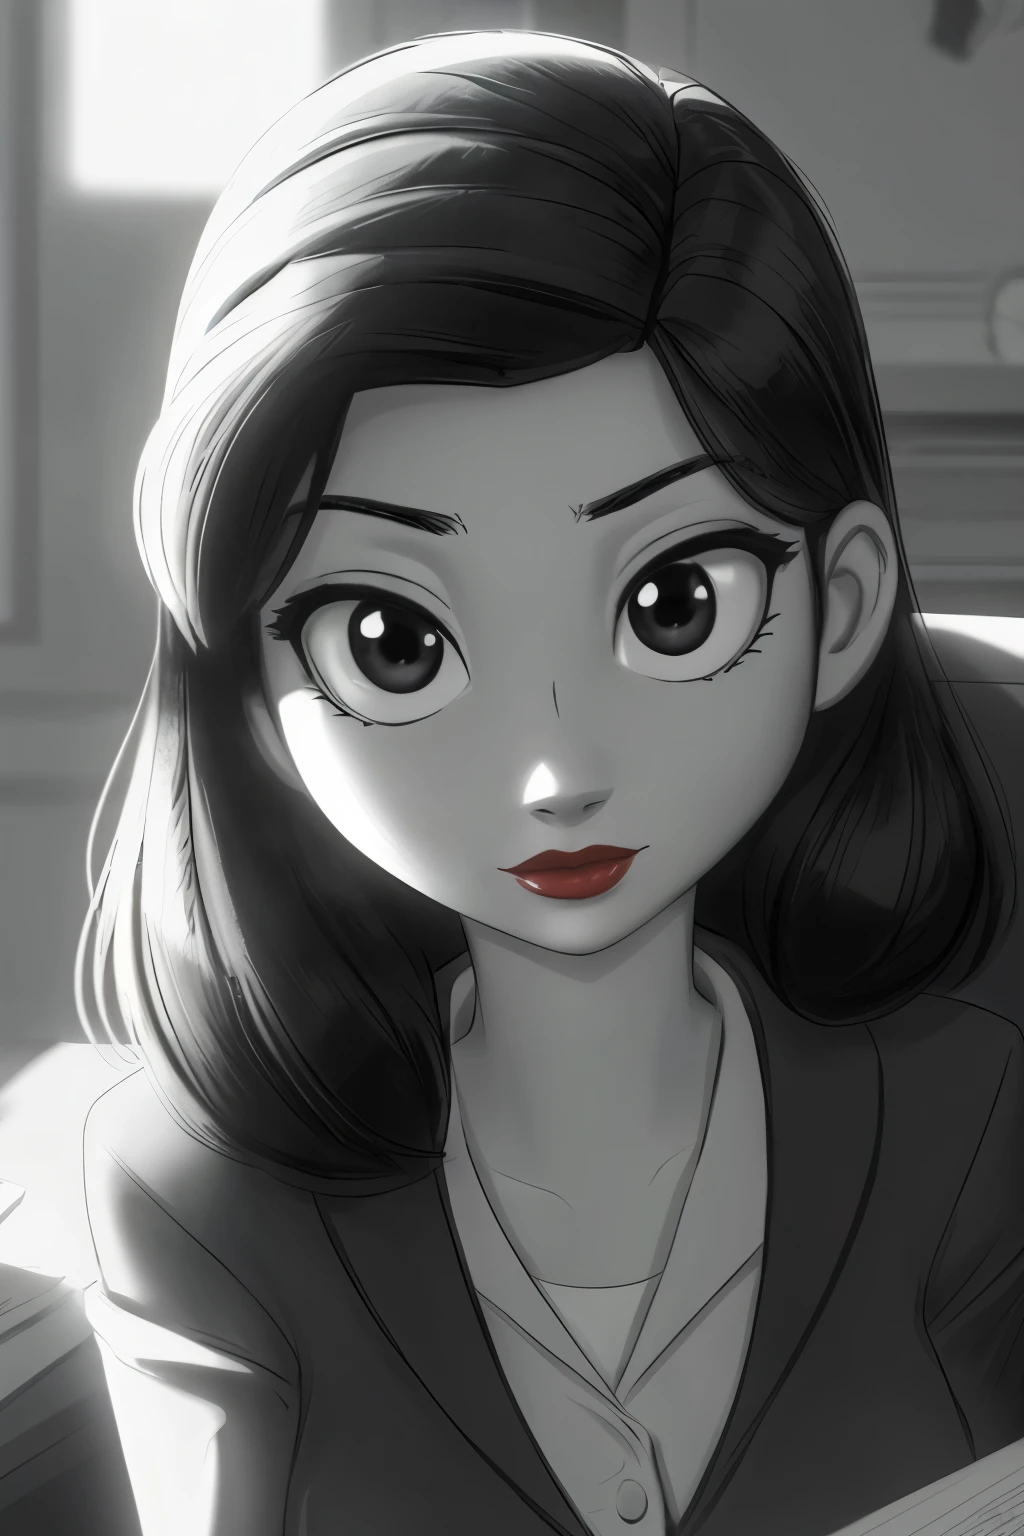 ((ultra quality)), ((tmasterpiece)), Meg, Paperman, (Black & White Style), (black and white cinema), ((Black, hairlong)), (Beautiful cute face), (beautiful female lips), Charming, ((sexy facial expression)), is looking at the camera, (Skin color: white), Body glare, ((detailed beautiful female eyes)), ((Black глаза глаза)), (juicy female lips), (red lipstick on the lips), (beautiful female hands), ((perfect female figure)), perfect female body, Beautiful waist, Gorgeous hips, Beautiful medium breasts, ((Subtle and beautiful)), sits seductively on a chair (close-up of the face), (dressed in Meg clothes, Strict office suit, black women&#39;s jacket and black skirt) background: office 50 years, ((Depth of field)), ((high quality clear image)), (crisp details), ((higly detailed)), Realistic, Professional Photo Session, ((Clear Focus)), the anime